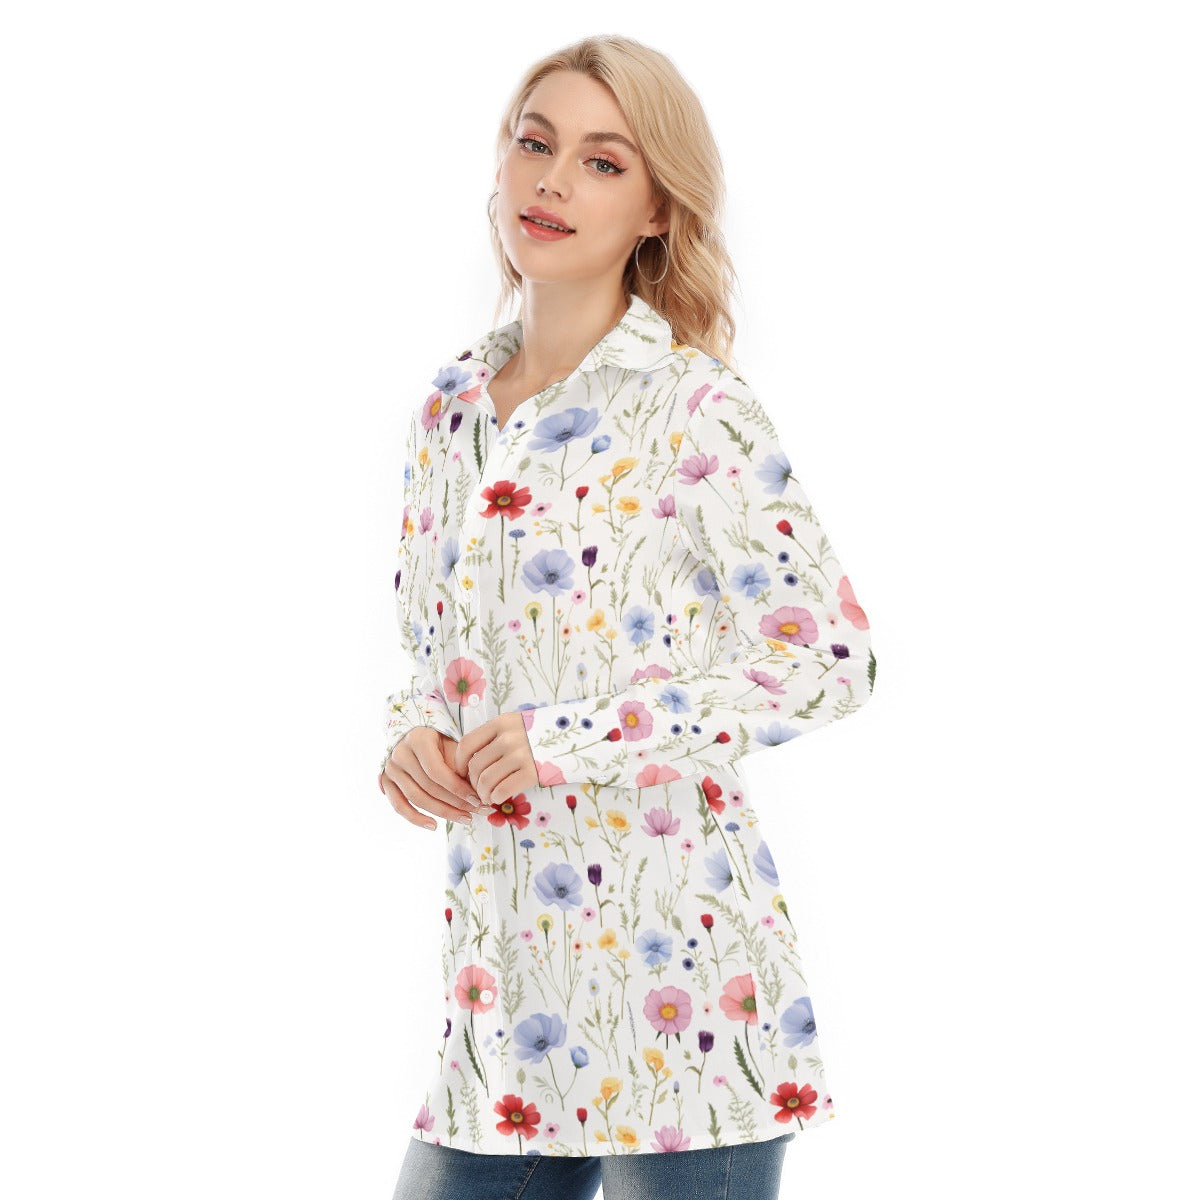 Wildflowers Long Sleeve Shirt Women Shirt, Floral White Button Up Ladies Blouse Print Buttoned Down Collared Casual Dress Going Out Top